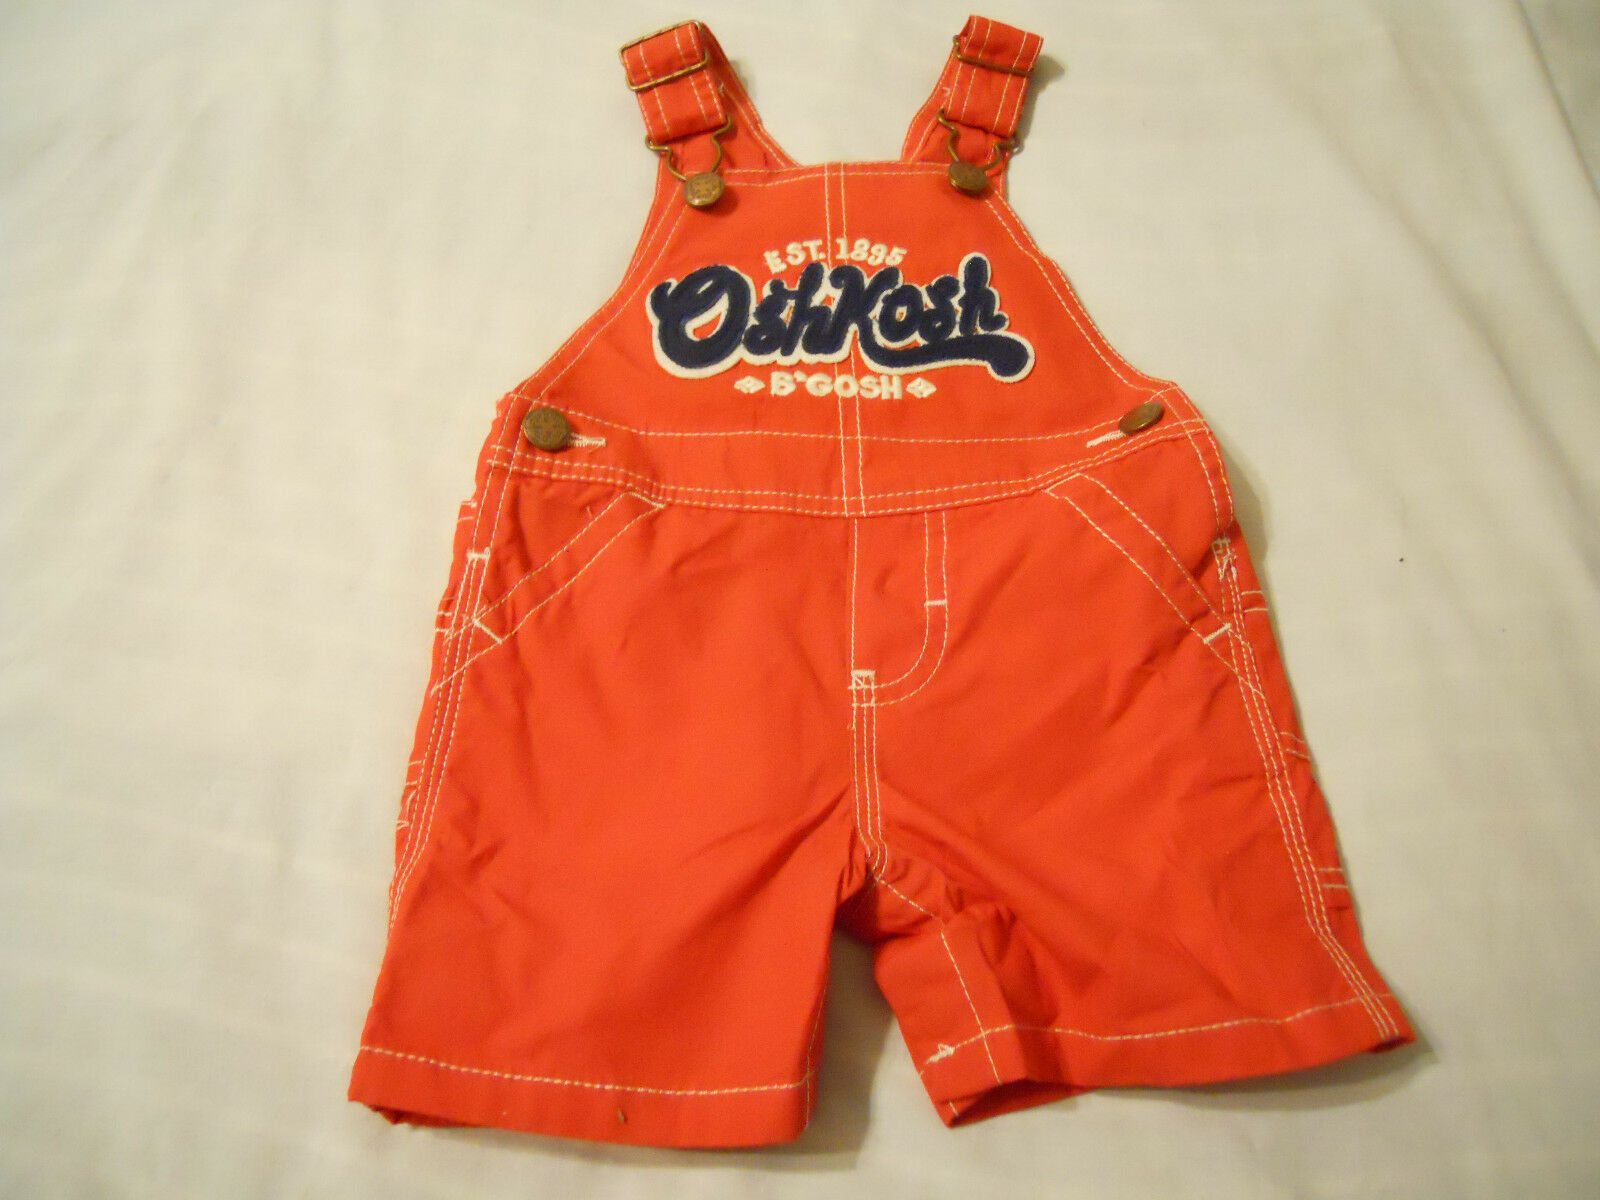 Primary image for Osh Kosh Bibs Boys Size 9 Months Red Overall Infant Baby